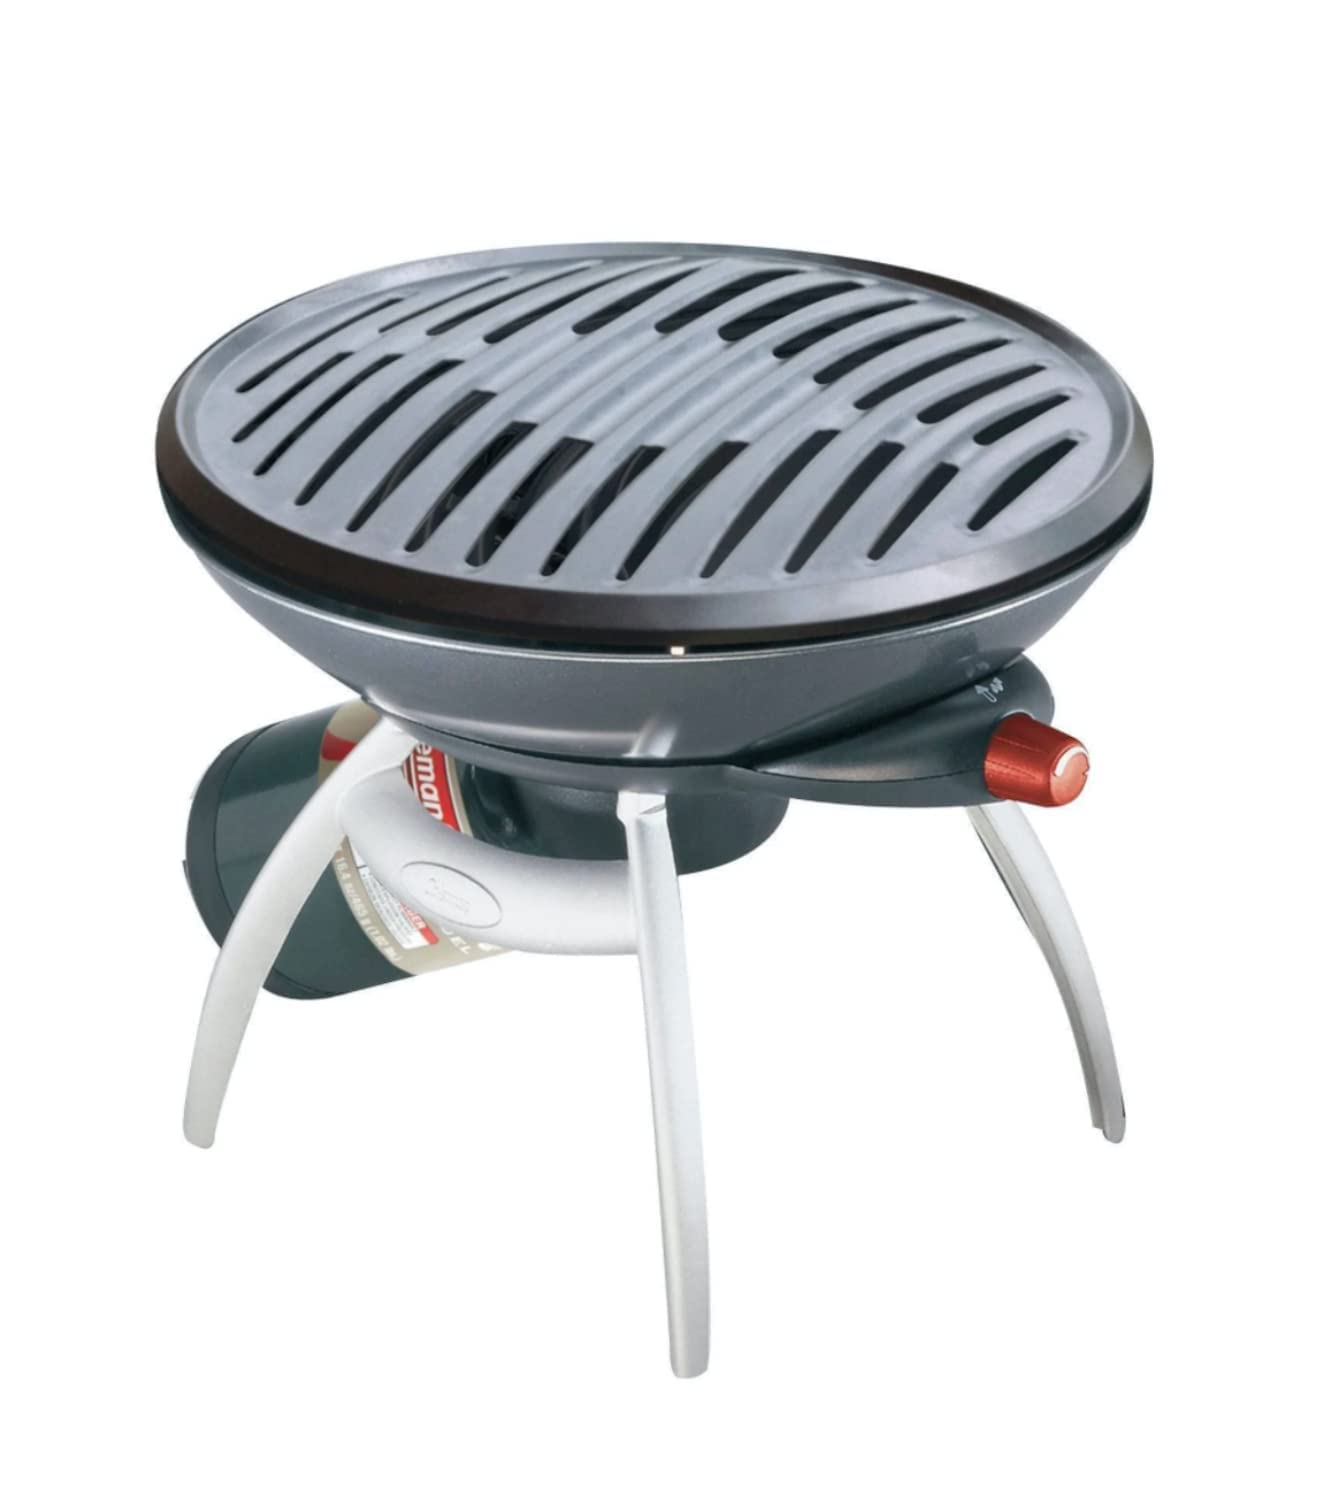 Coleman RoadTrip Party Basic Propane Grill